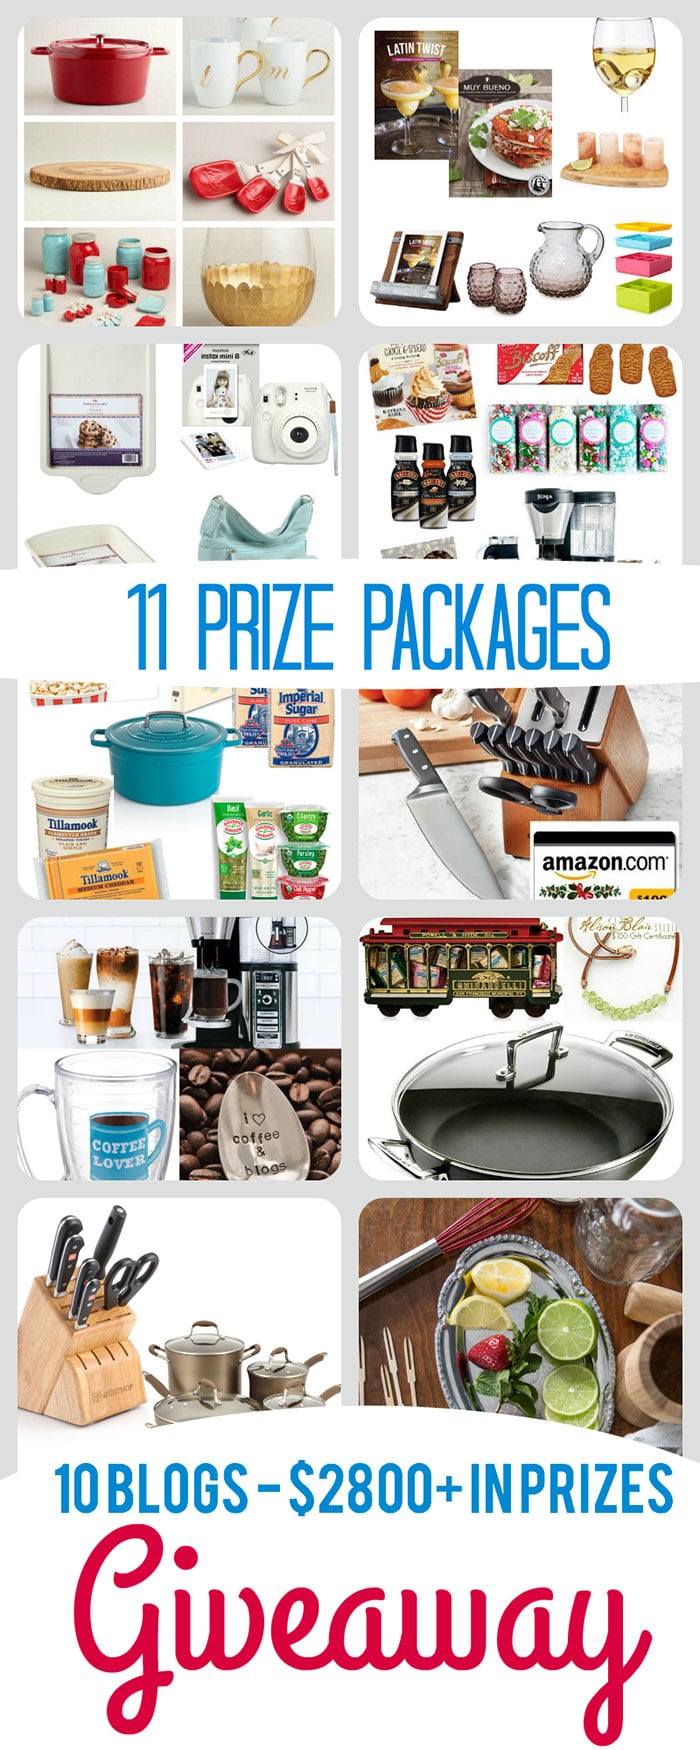 10 amazing bloggers giving away 11 amazing prize packages worth over $2800 combined, come enter and win some of our favorite items